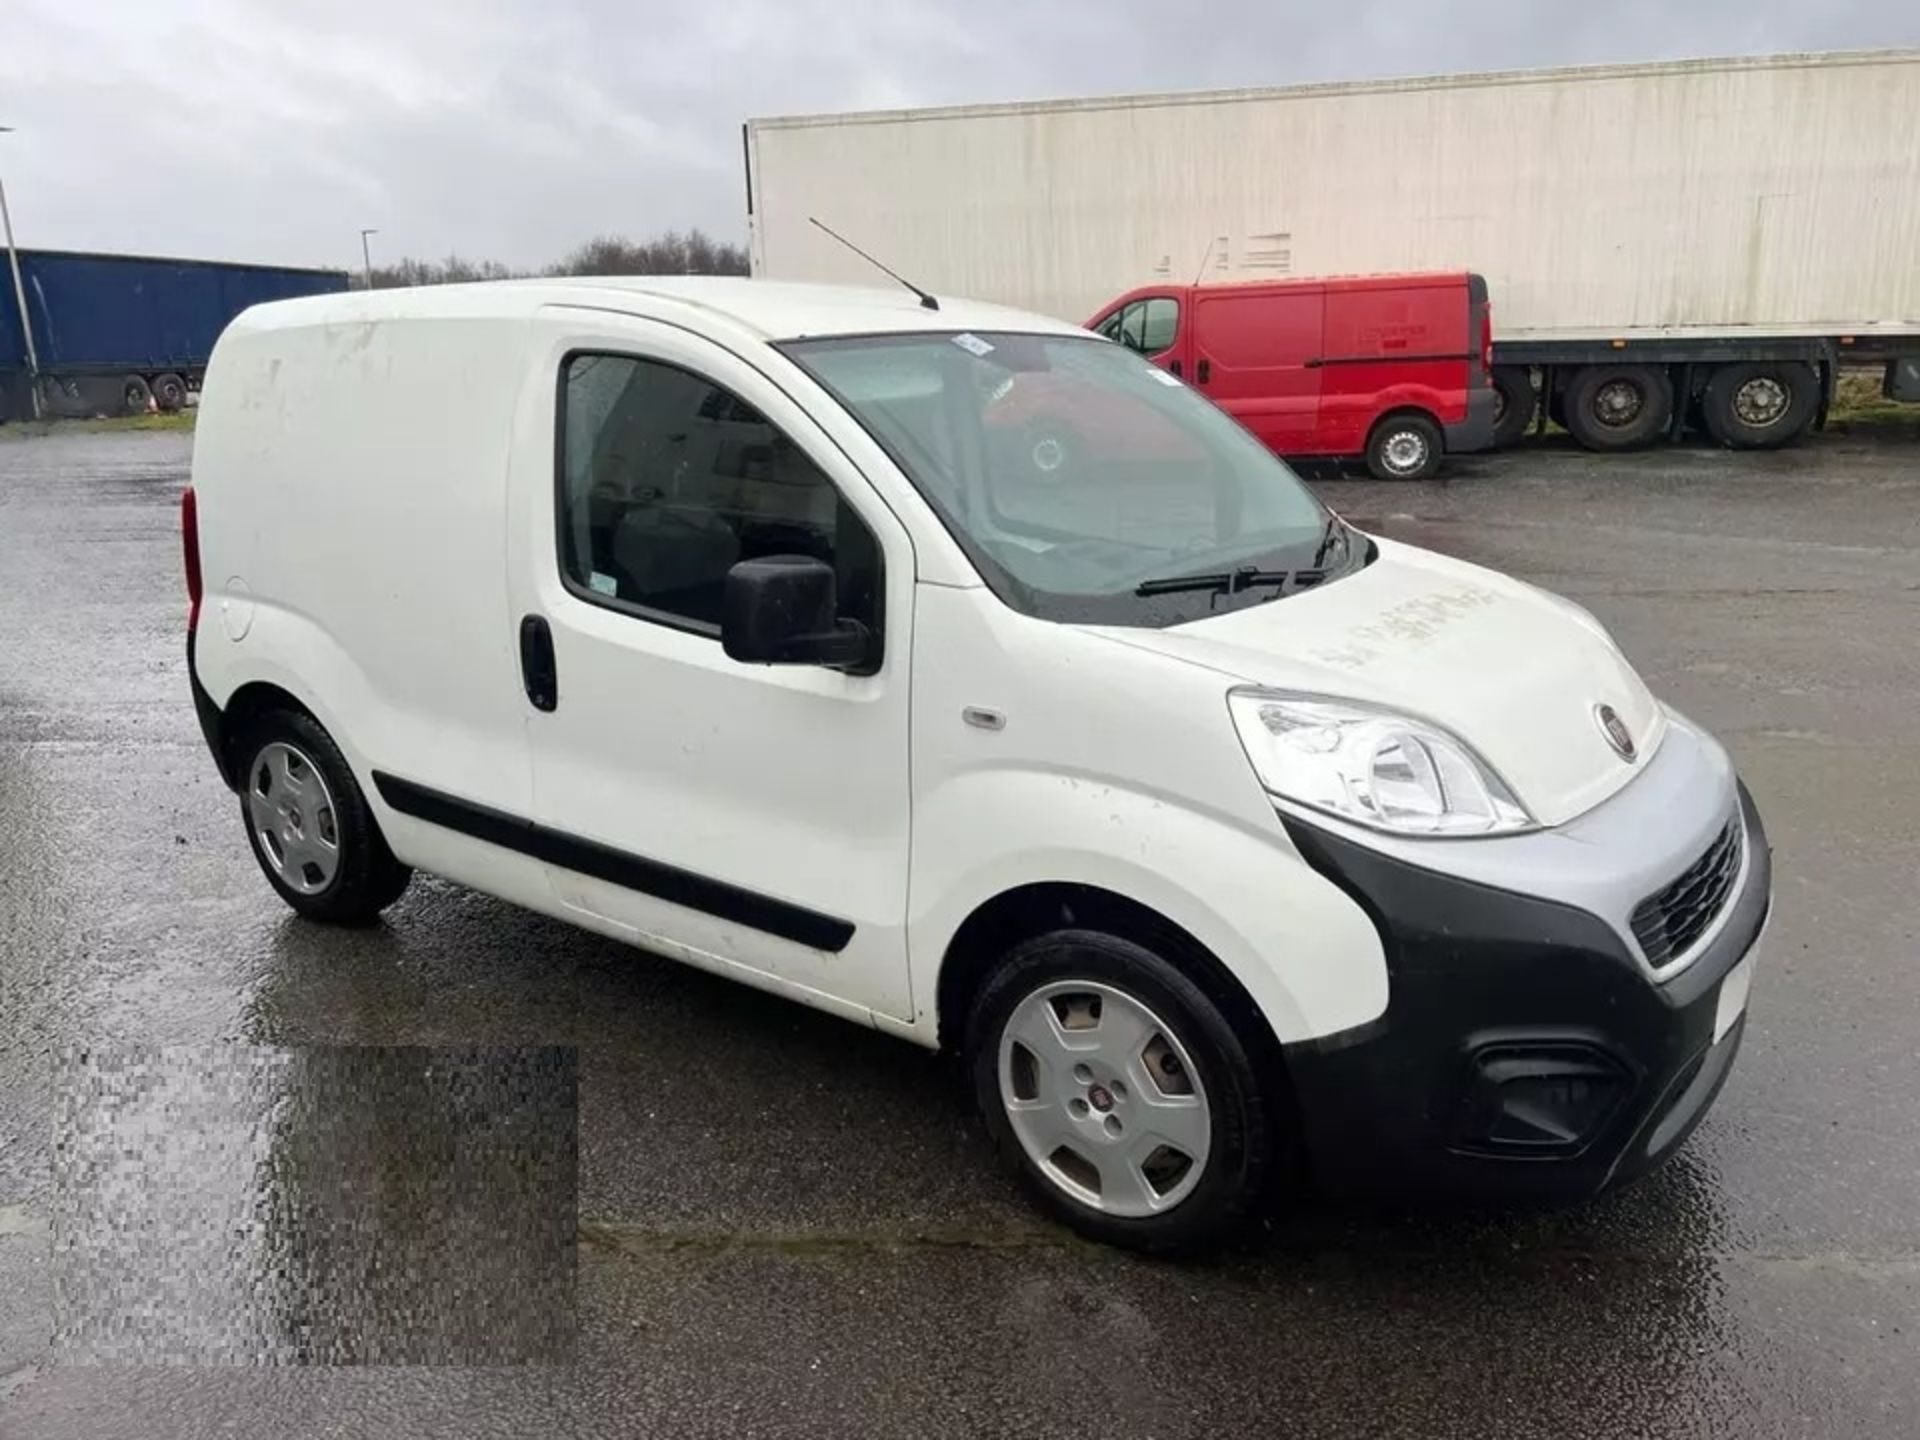 FIAT FIORINO SX 1.3 HDI VAN 2019 - LOADED WITH FEATURES, SOLD FOR SPARES OR REPAIRS - Image 10 of 12